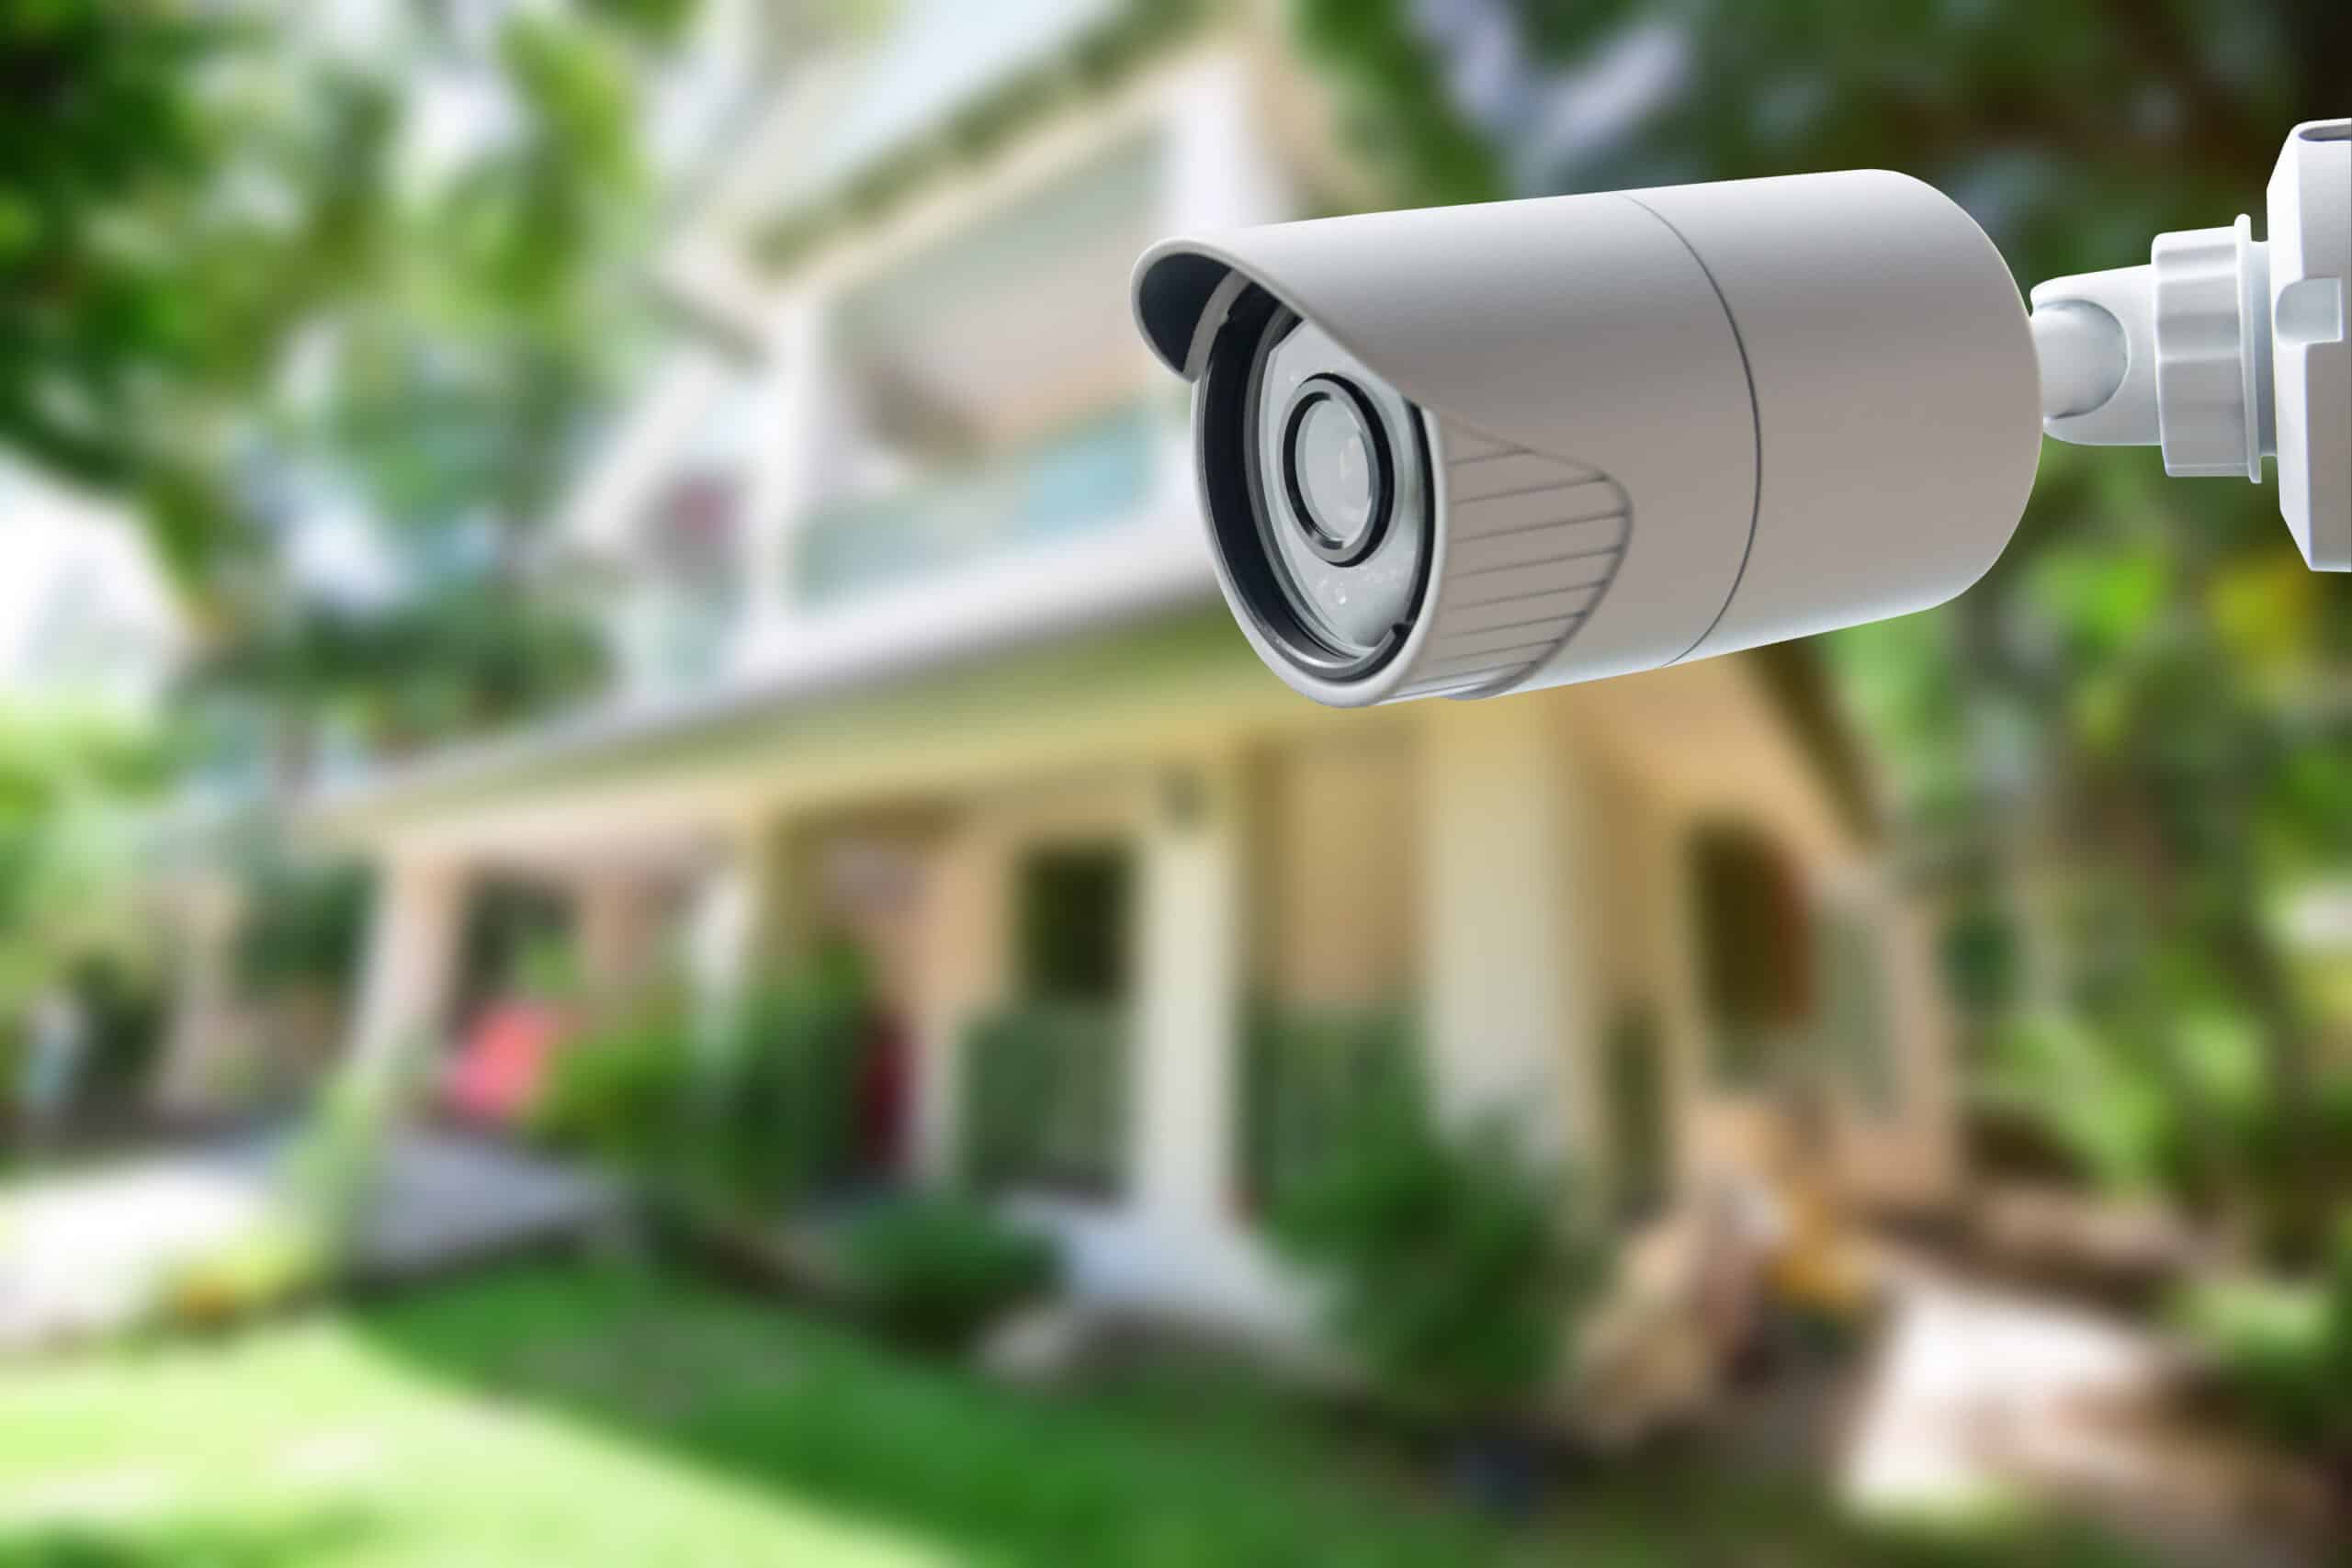 What Should I Look For When Buying Outdoor Security Cameras?